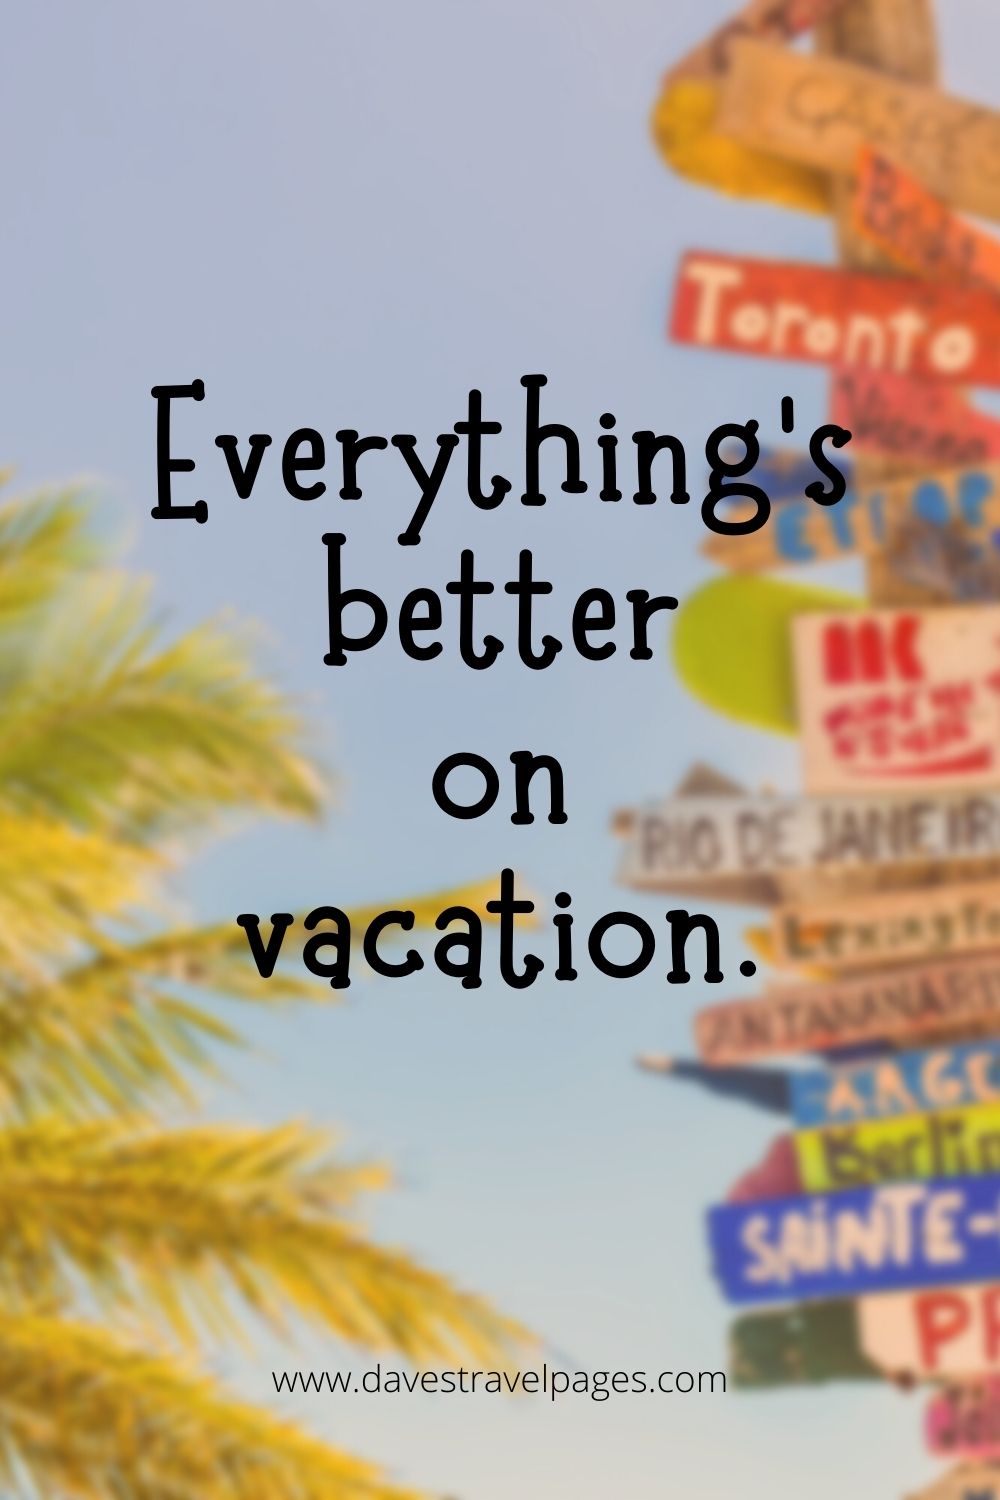 200 + Vacation Instagram Captions For Your Epic Holiday Photos